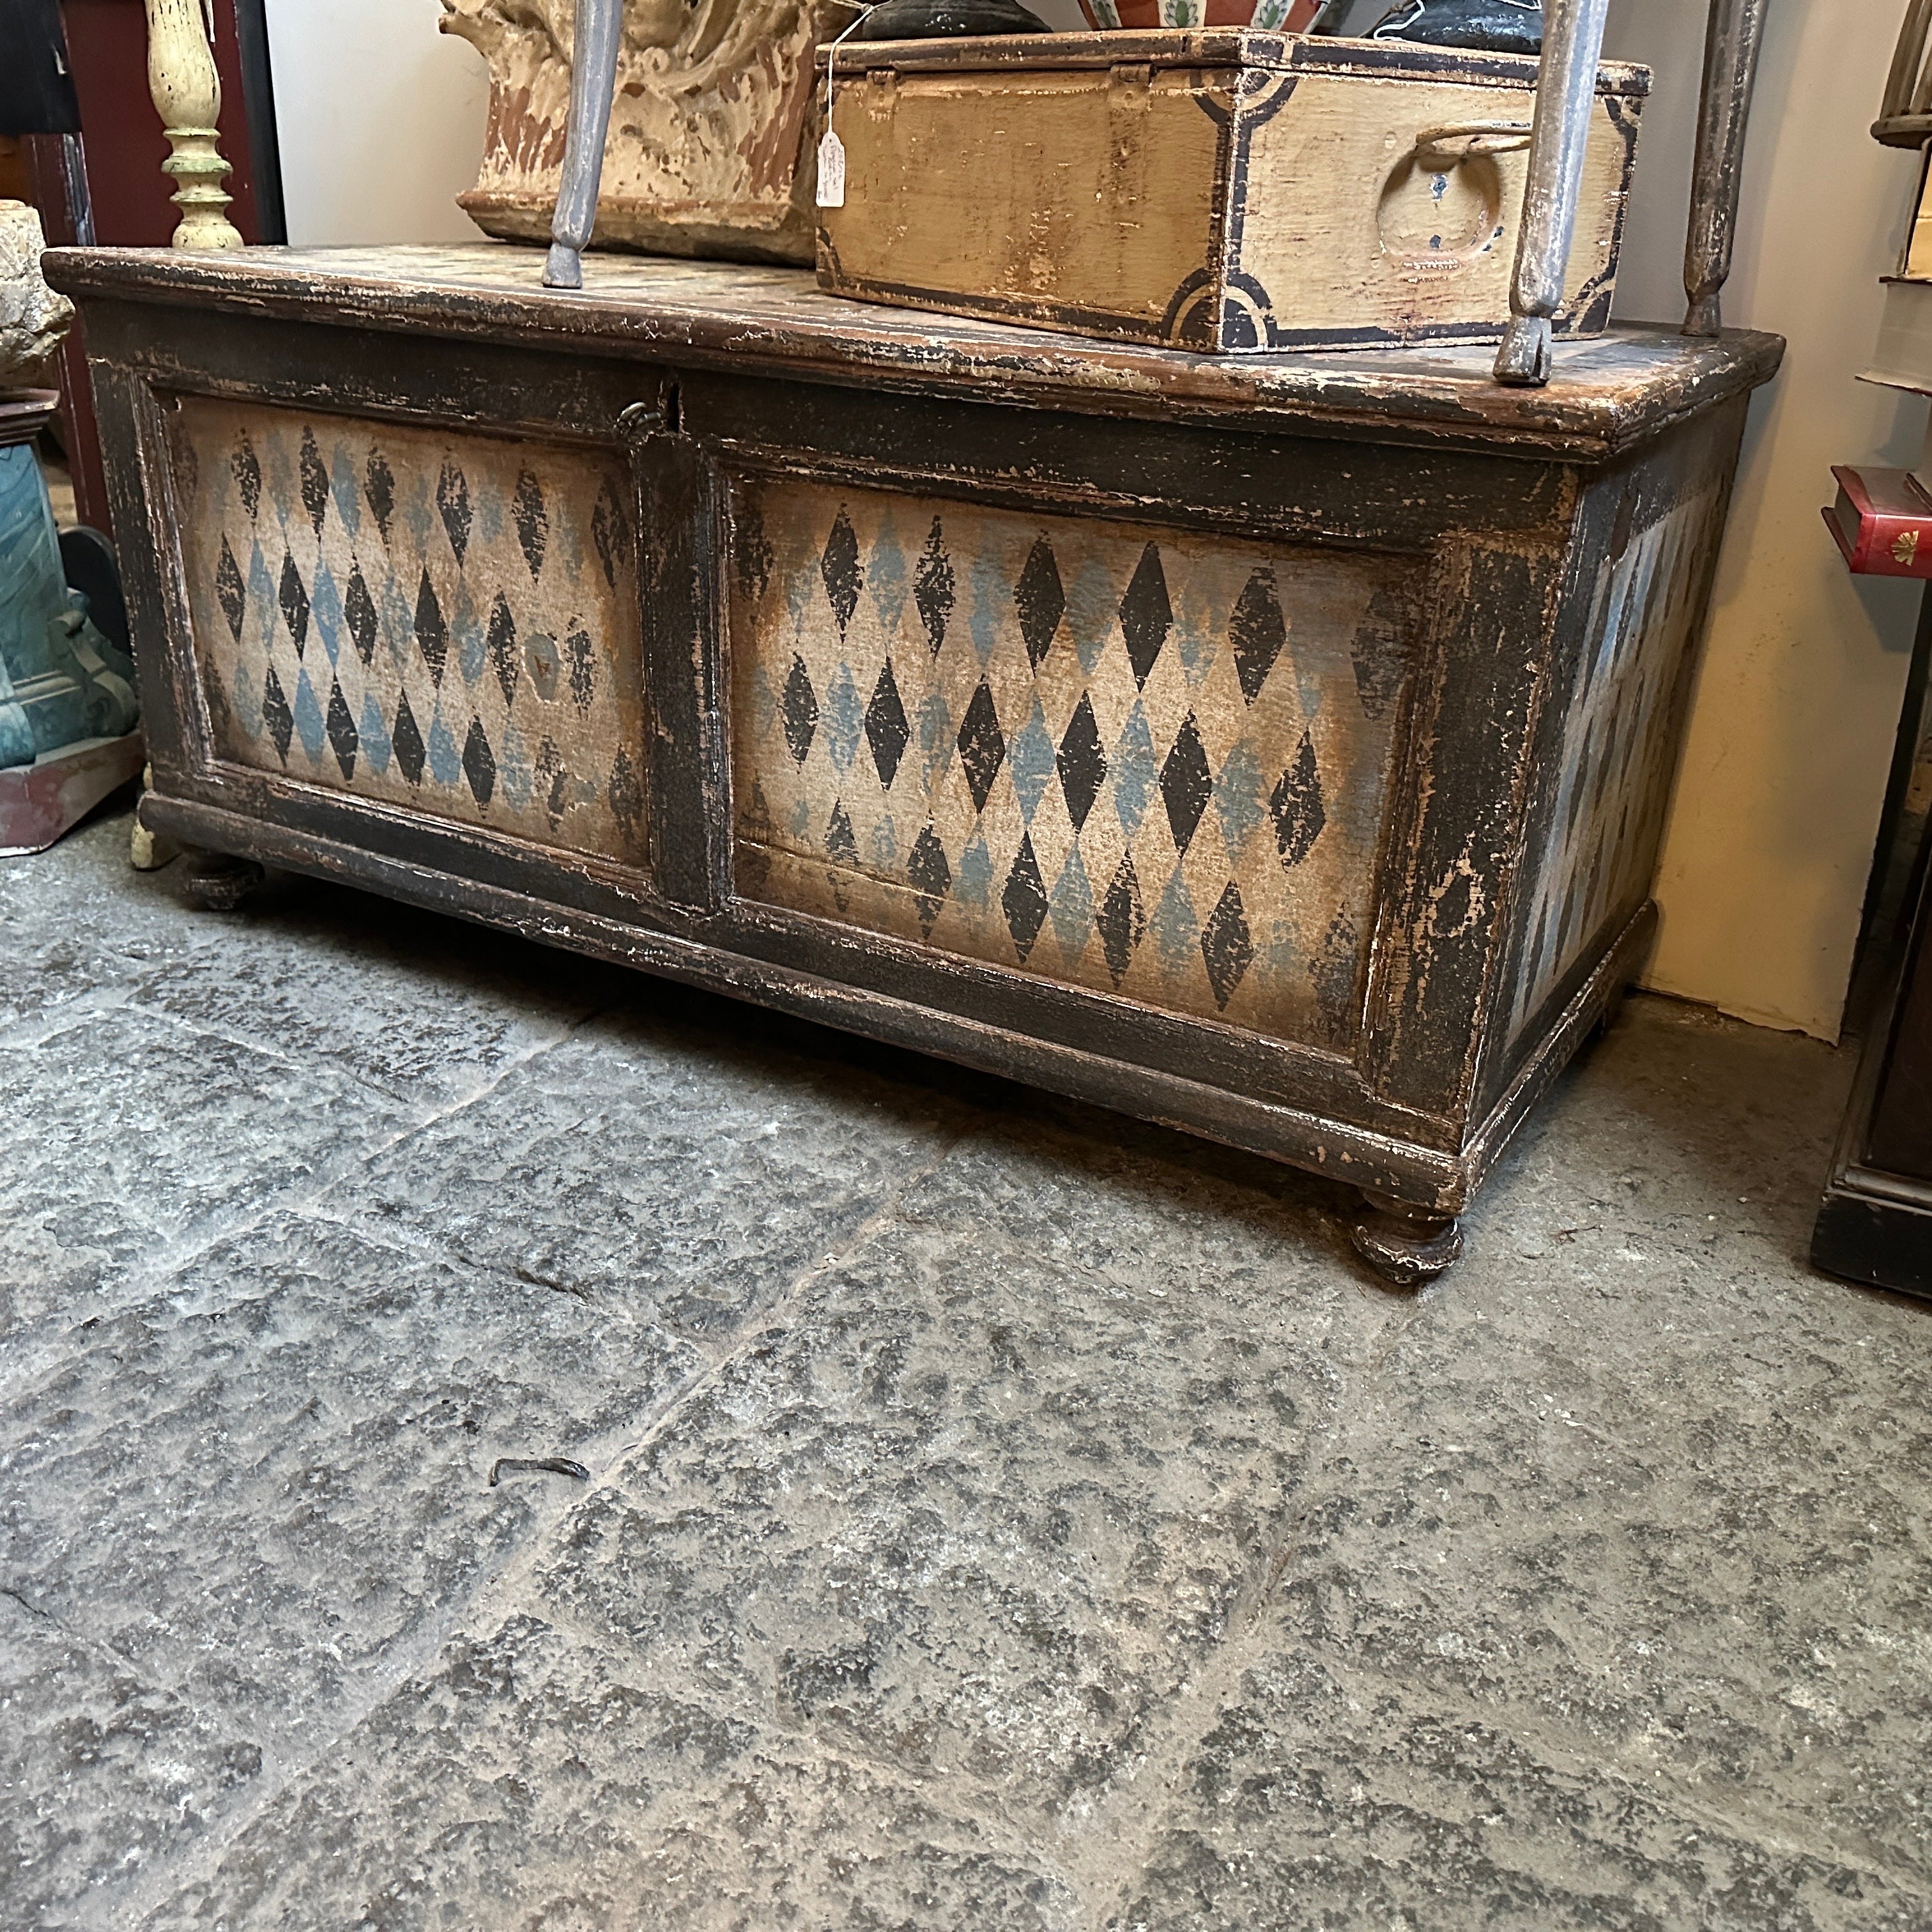 A Tuscanian blanket chest hand-crafted in Italy in the late 19th century, it's in original conditions and it has normal signs of use and age. The blue, white and black decor depicts rhombus motifs and it's suitable for modern or classic ambient. The